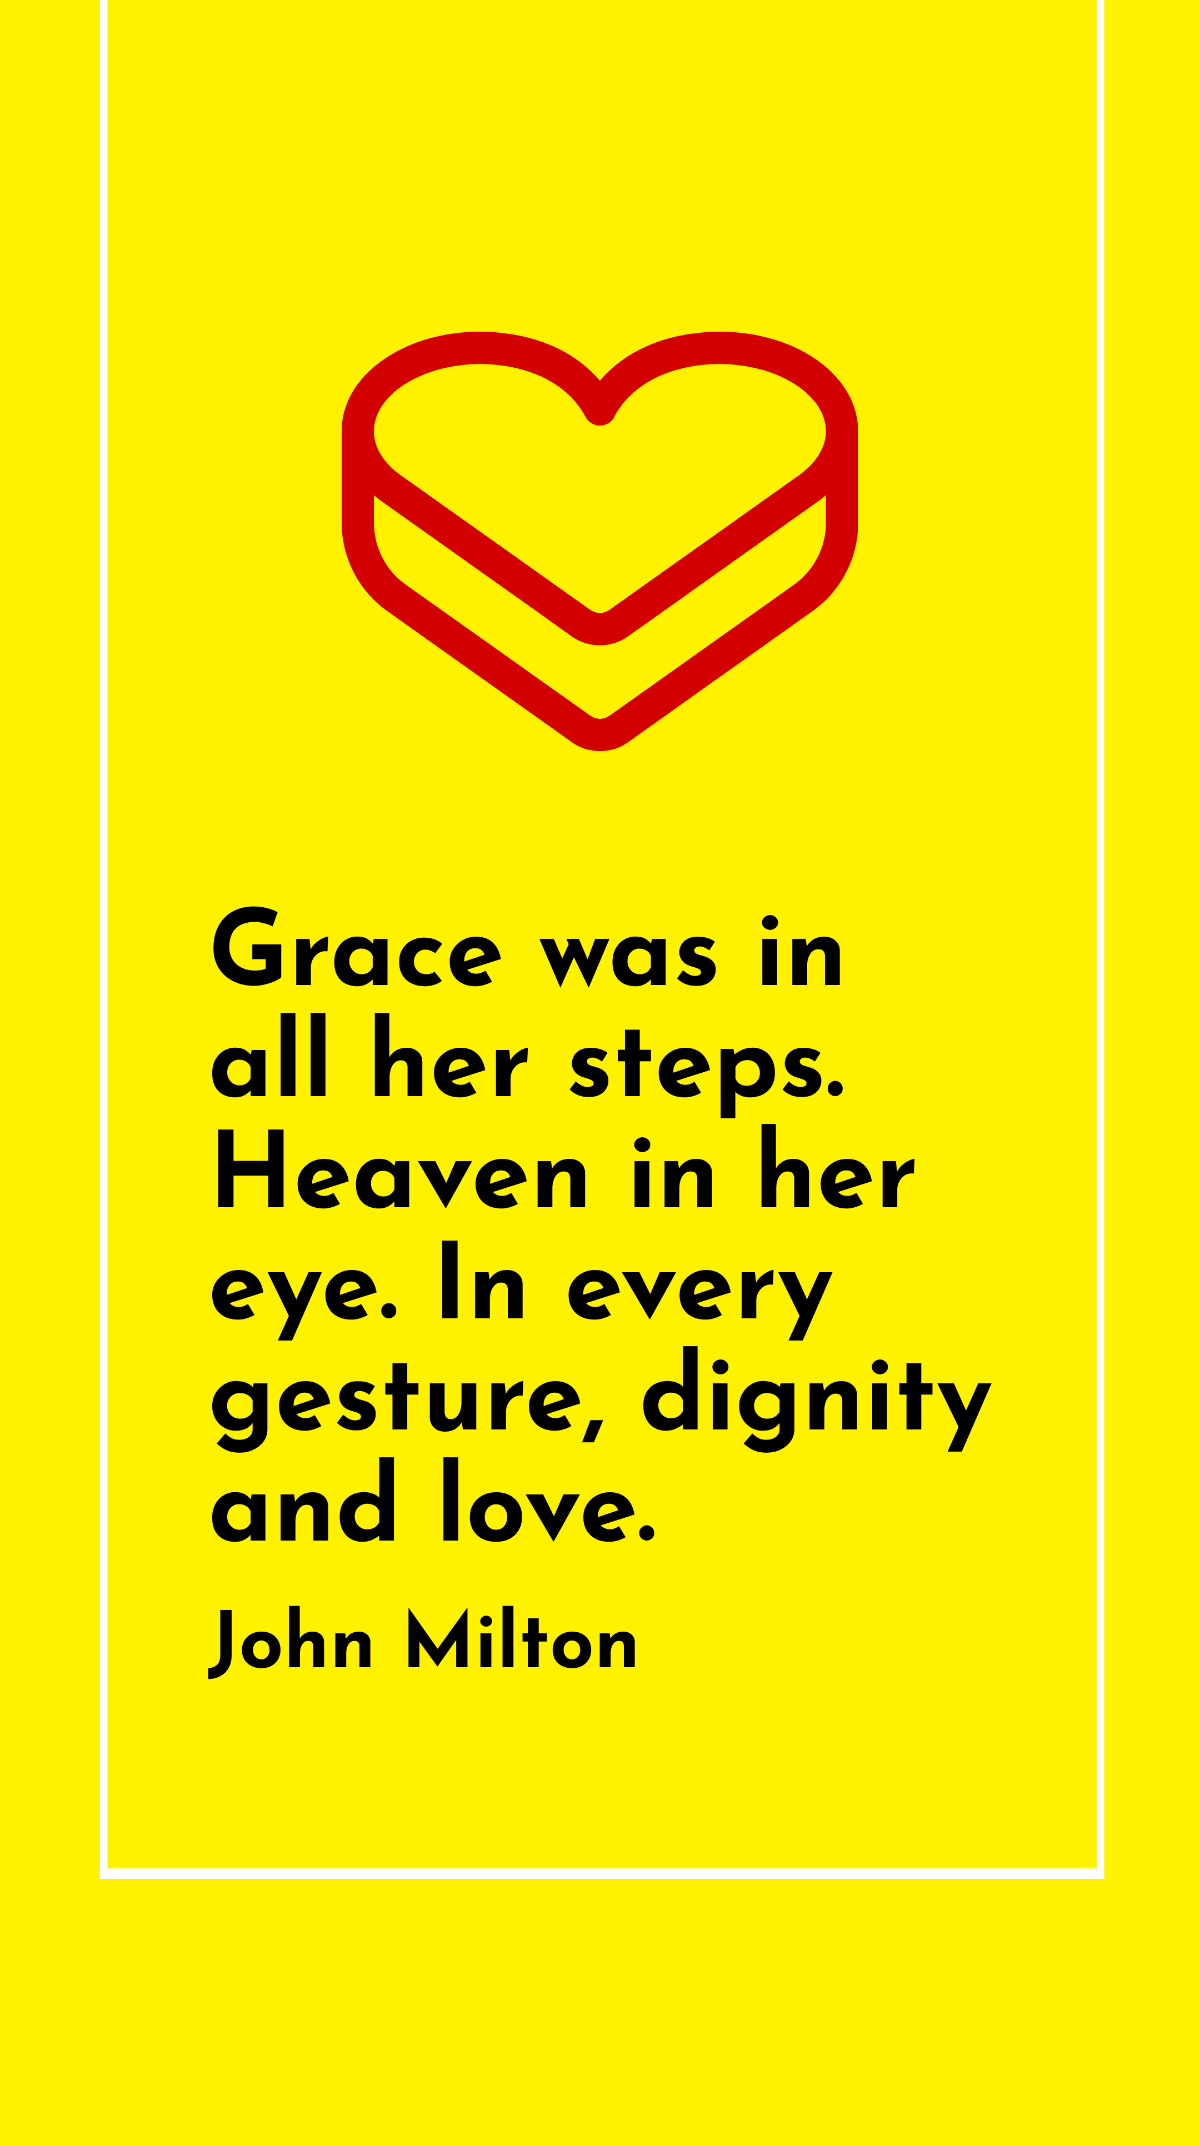 Free John Milton - Grace was in all her steps. Heaven in her eye. In every gesture, dignity and love. Template